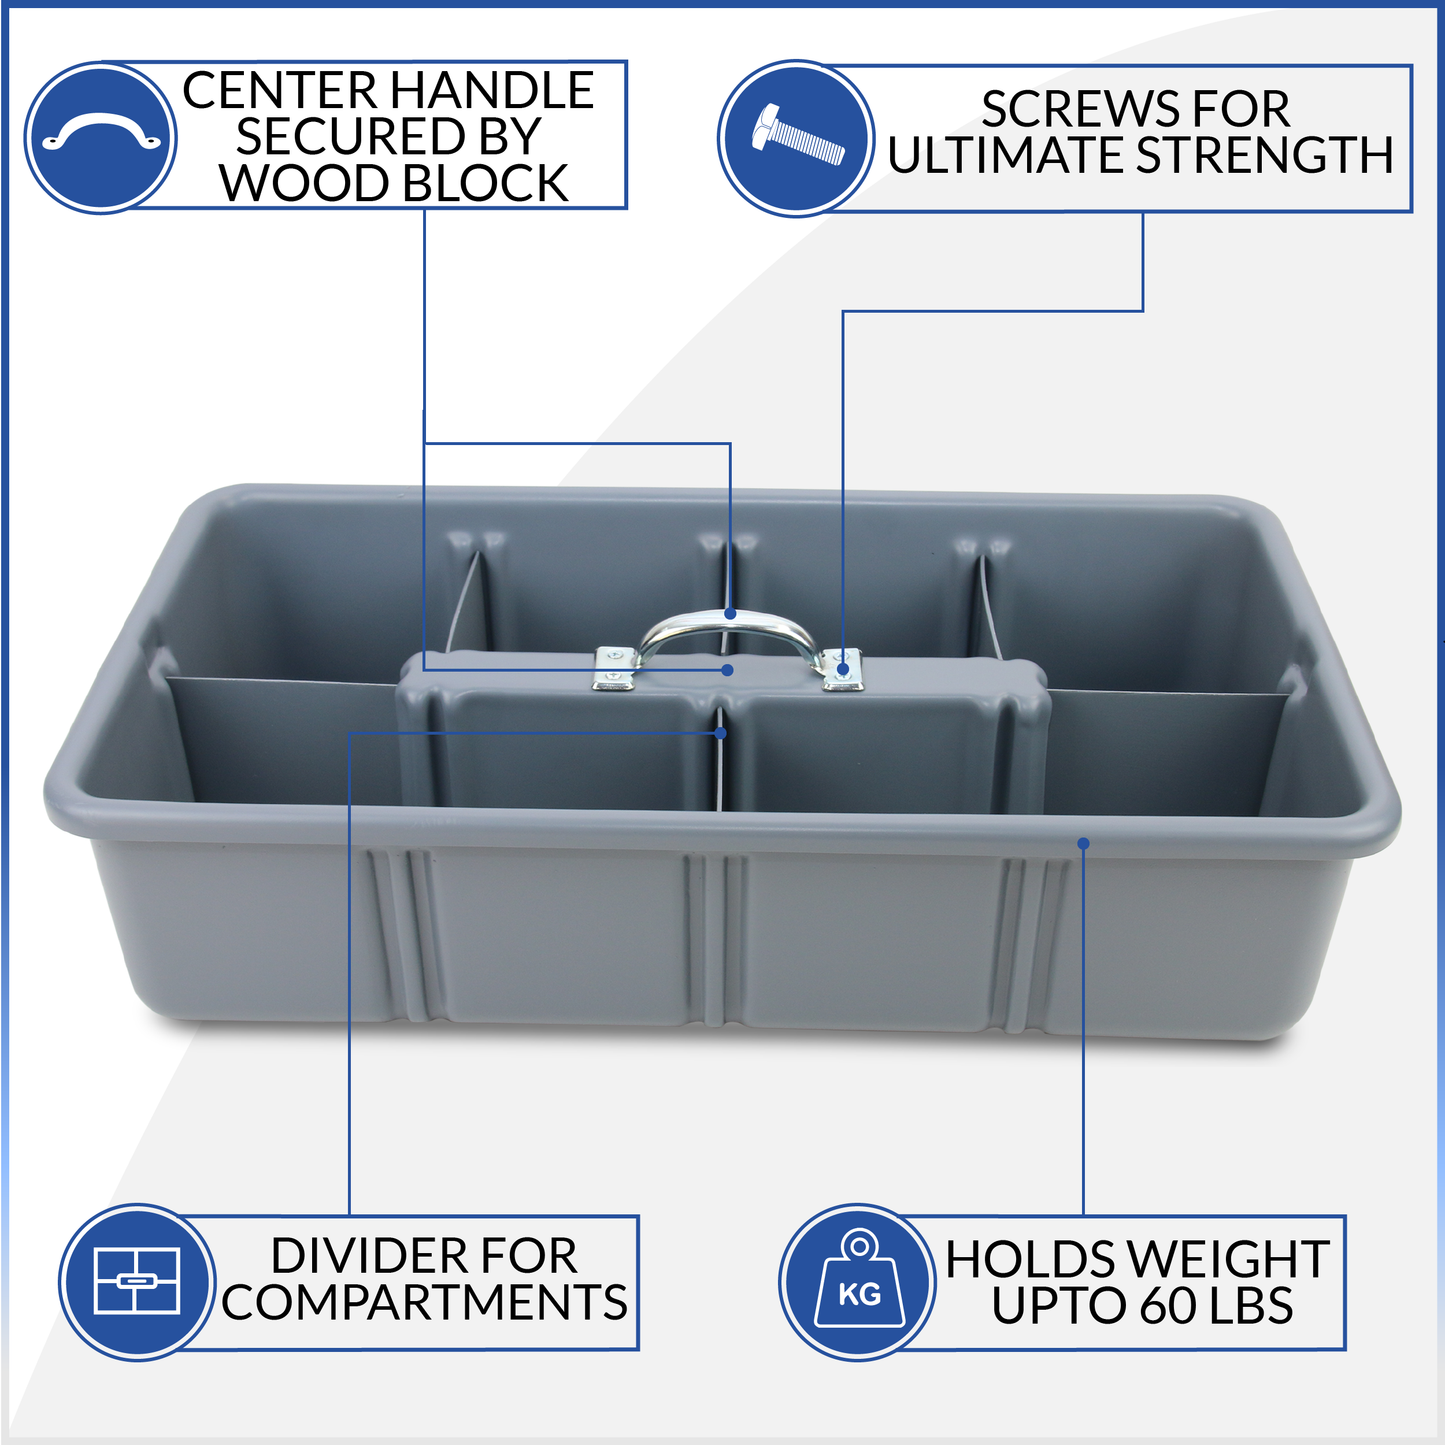 Pro-grade Large sized  25.75"x13.5"x6.5" Tote/tool Tray, includes 6 dividers, HDPE with reinforced handle